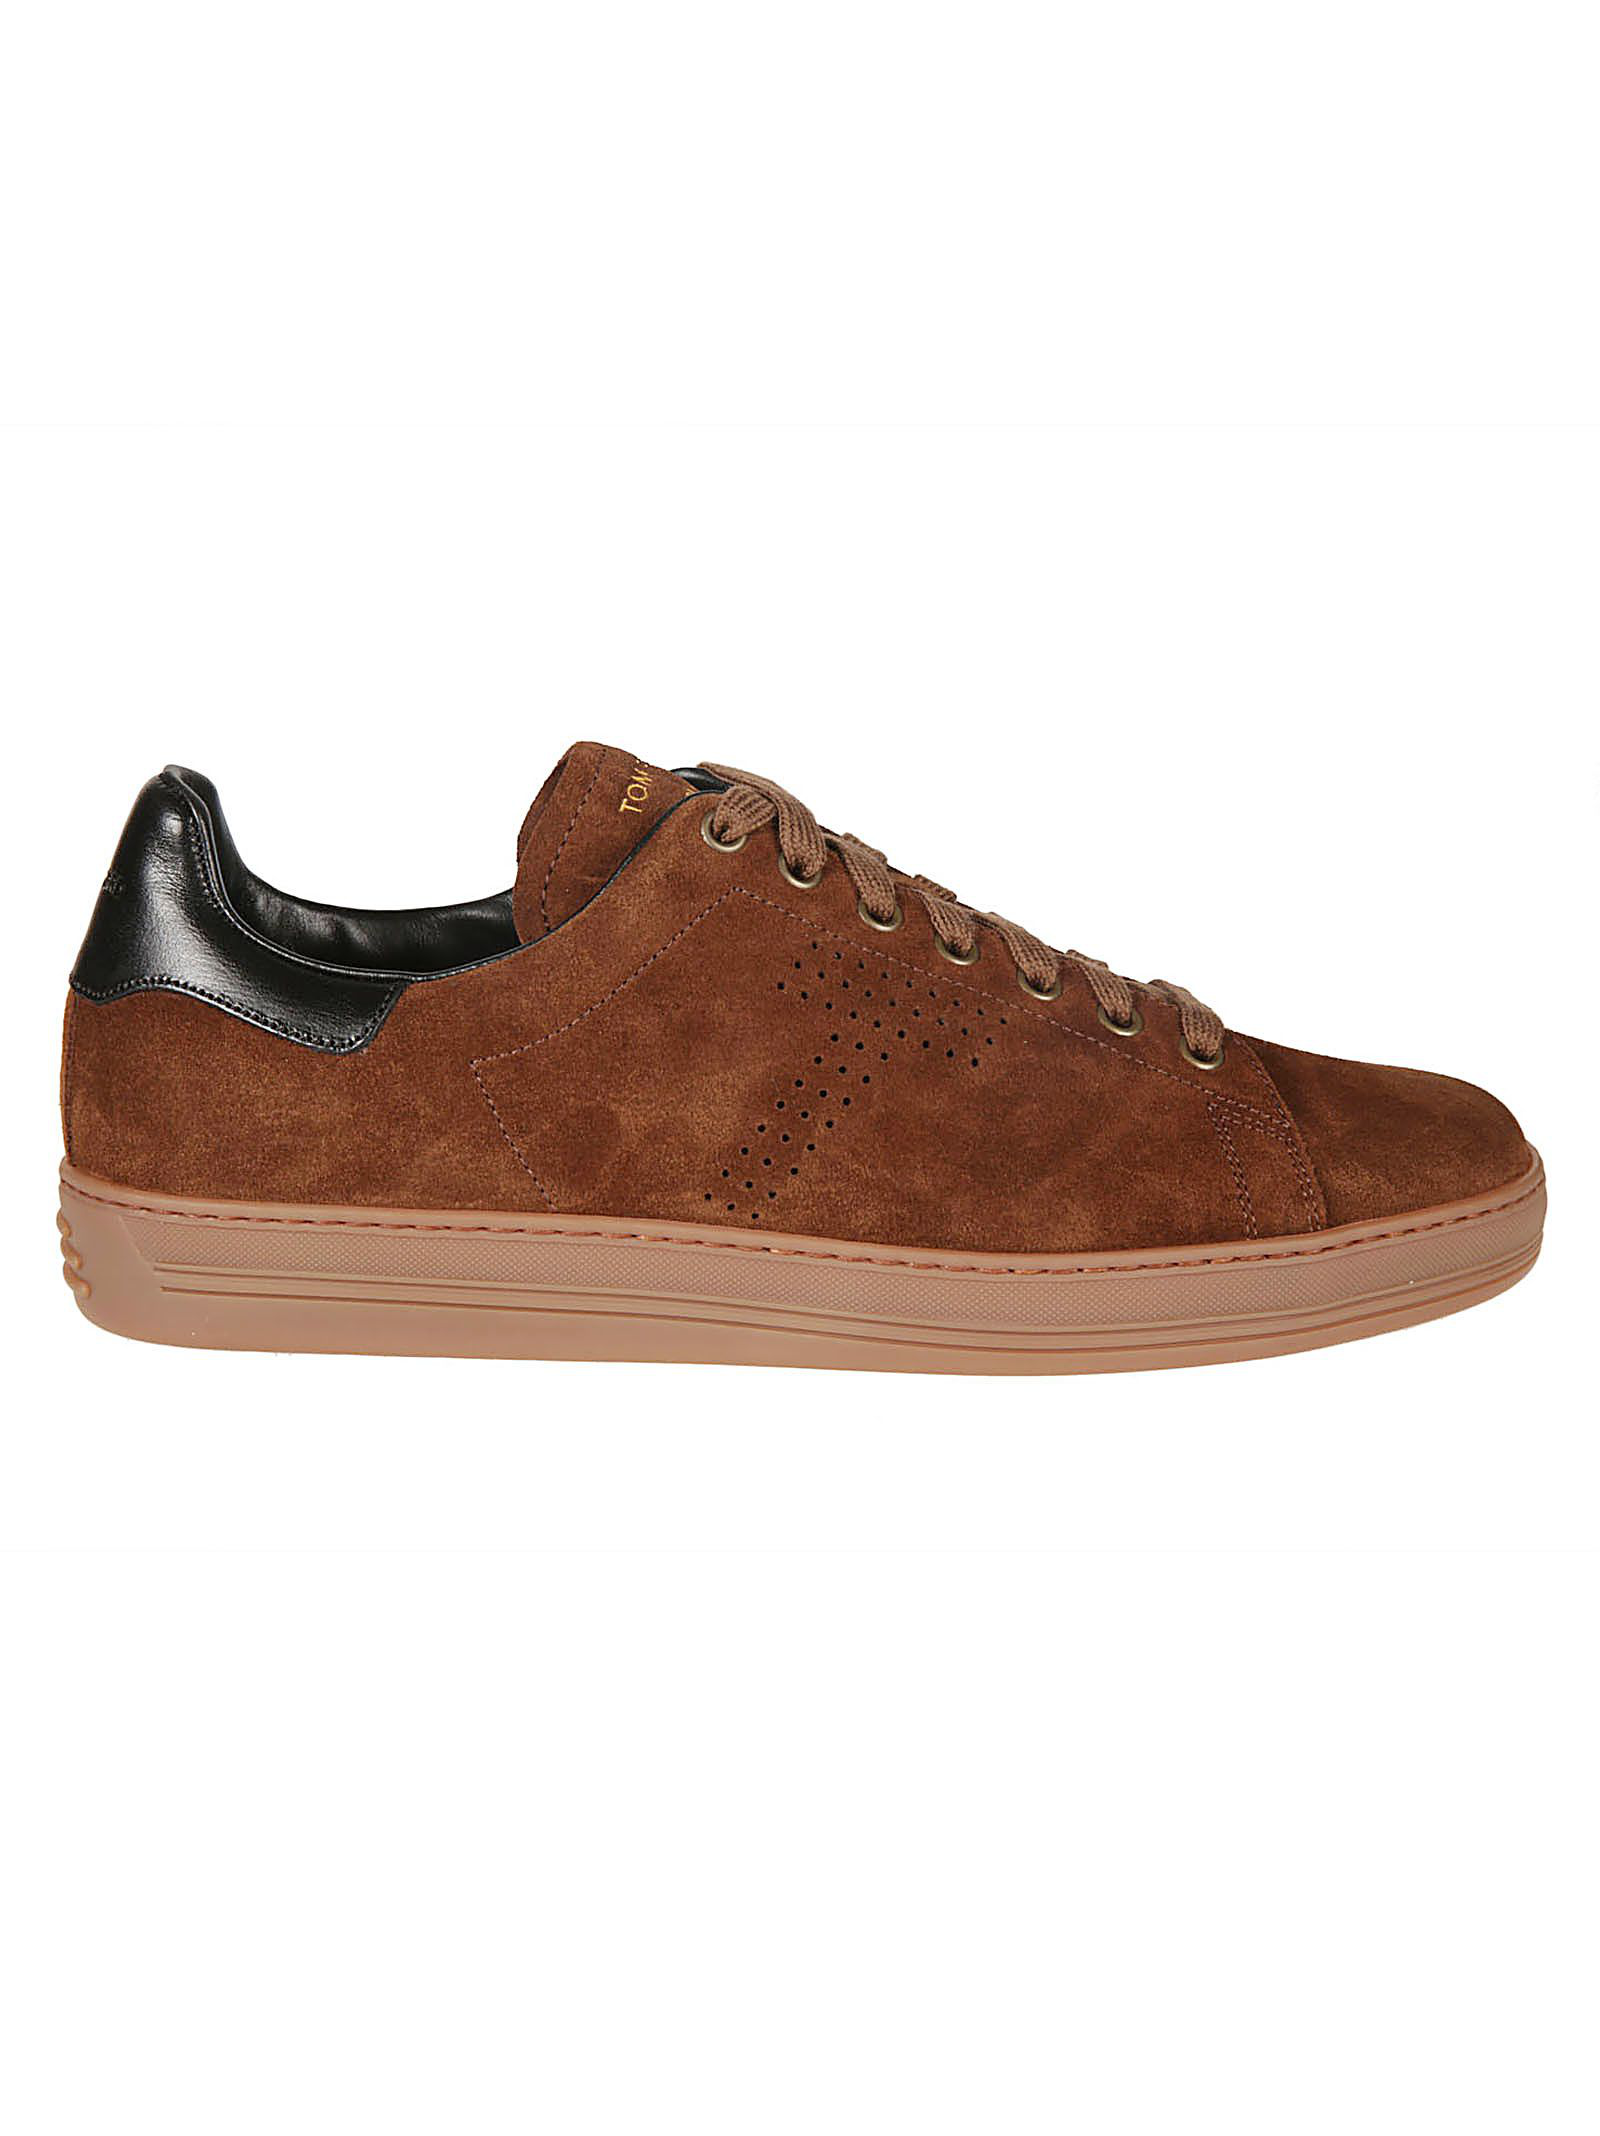 Tom Ford Perforated Logo Sneakers In Brown | ModeSens